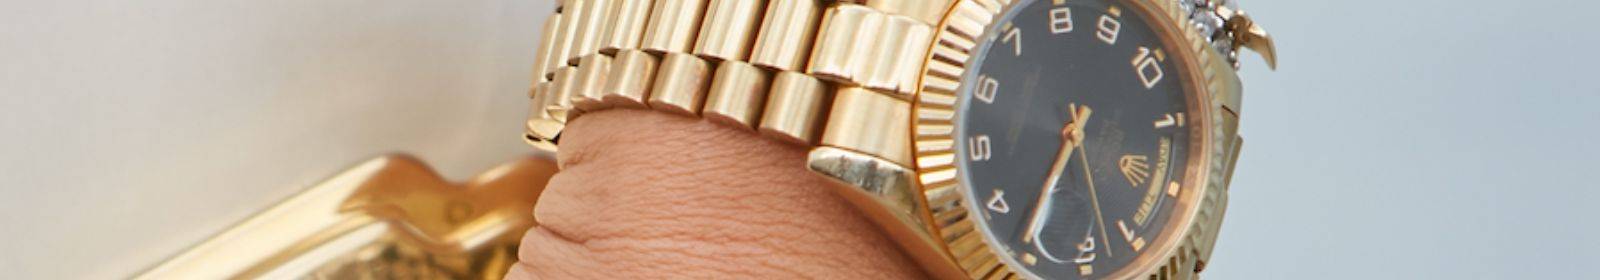 Watches & jewelry for women